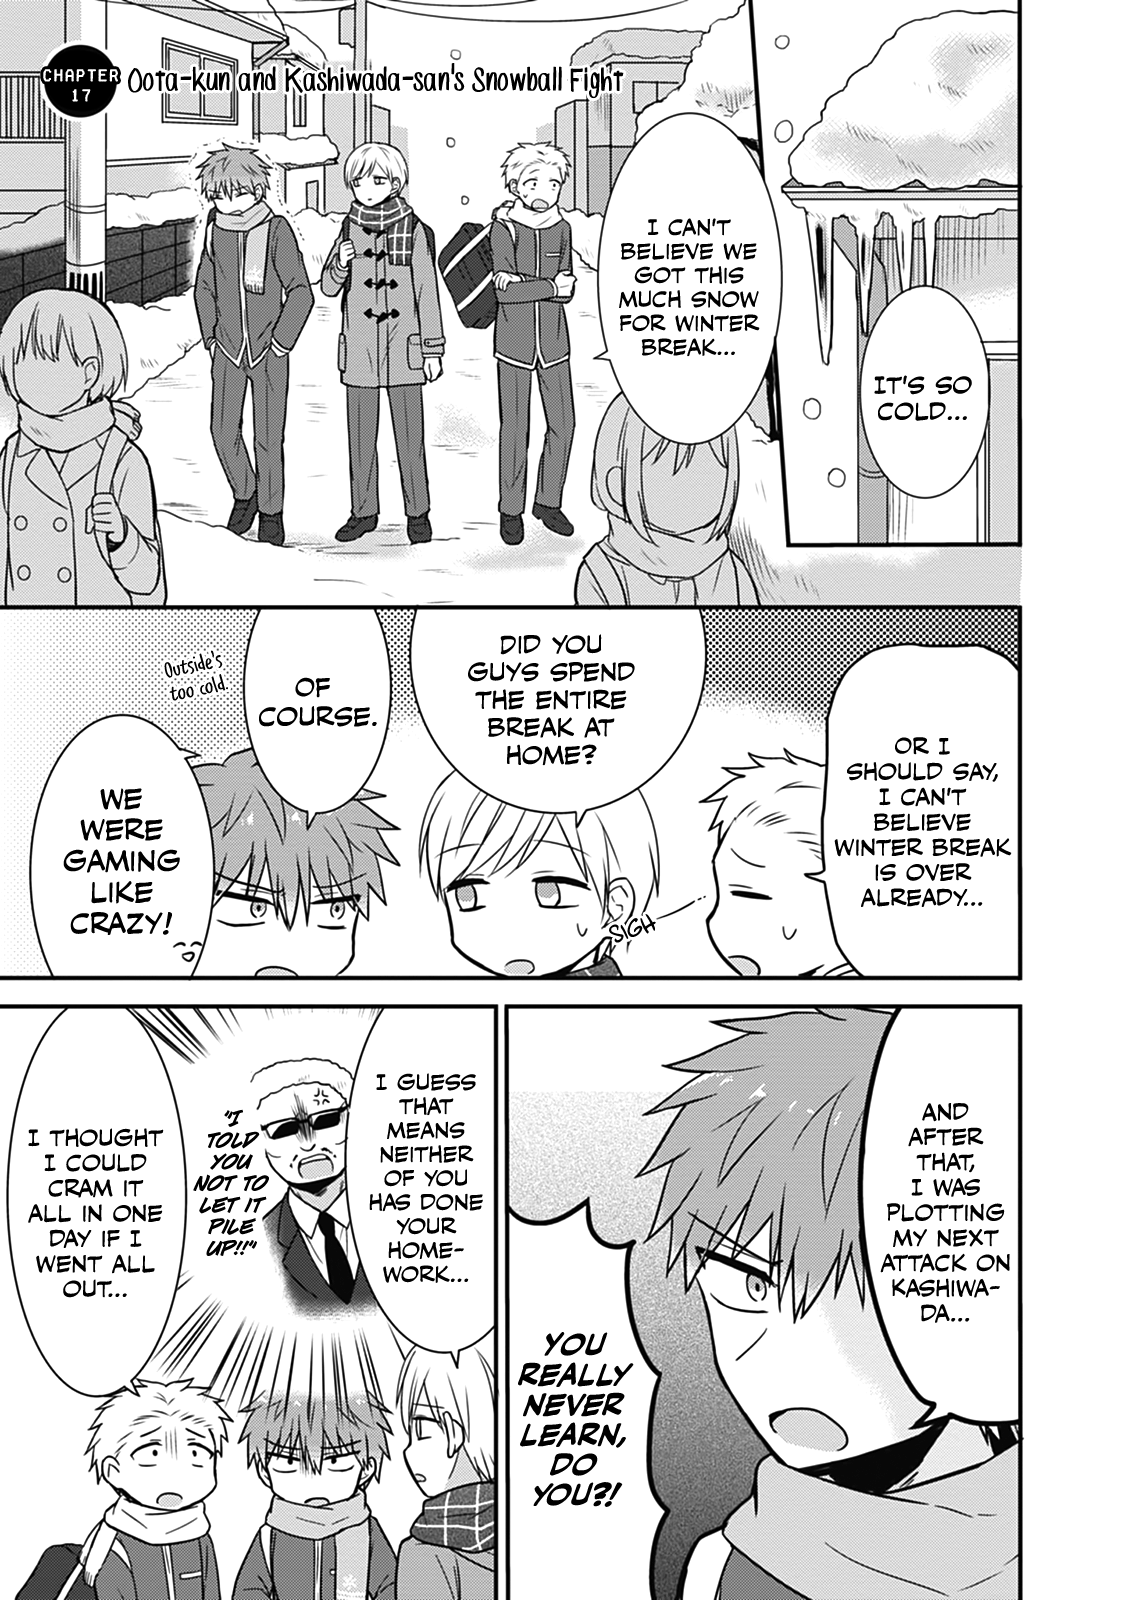 Expressionless Kashiwada-San And Emotional Oota-Kun Vol.2 Chapter 17: Oota-Kun And Kashiwada-San's Snowball Fight - Picture 1